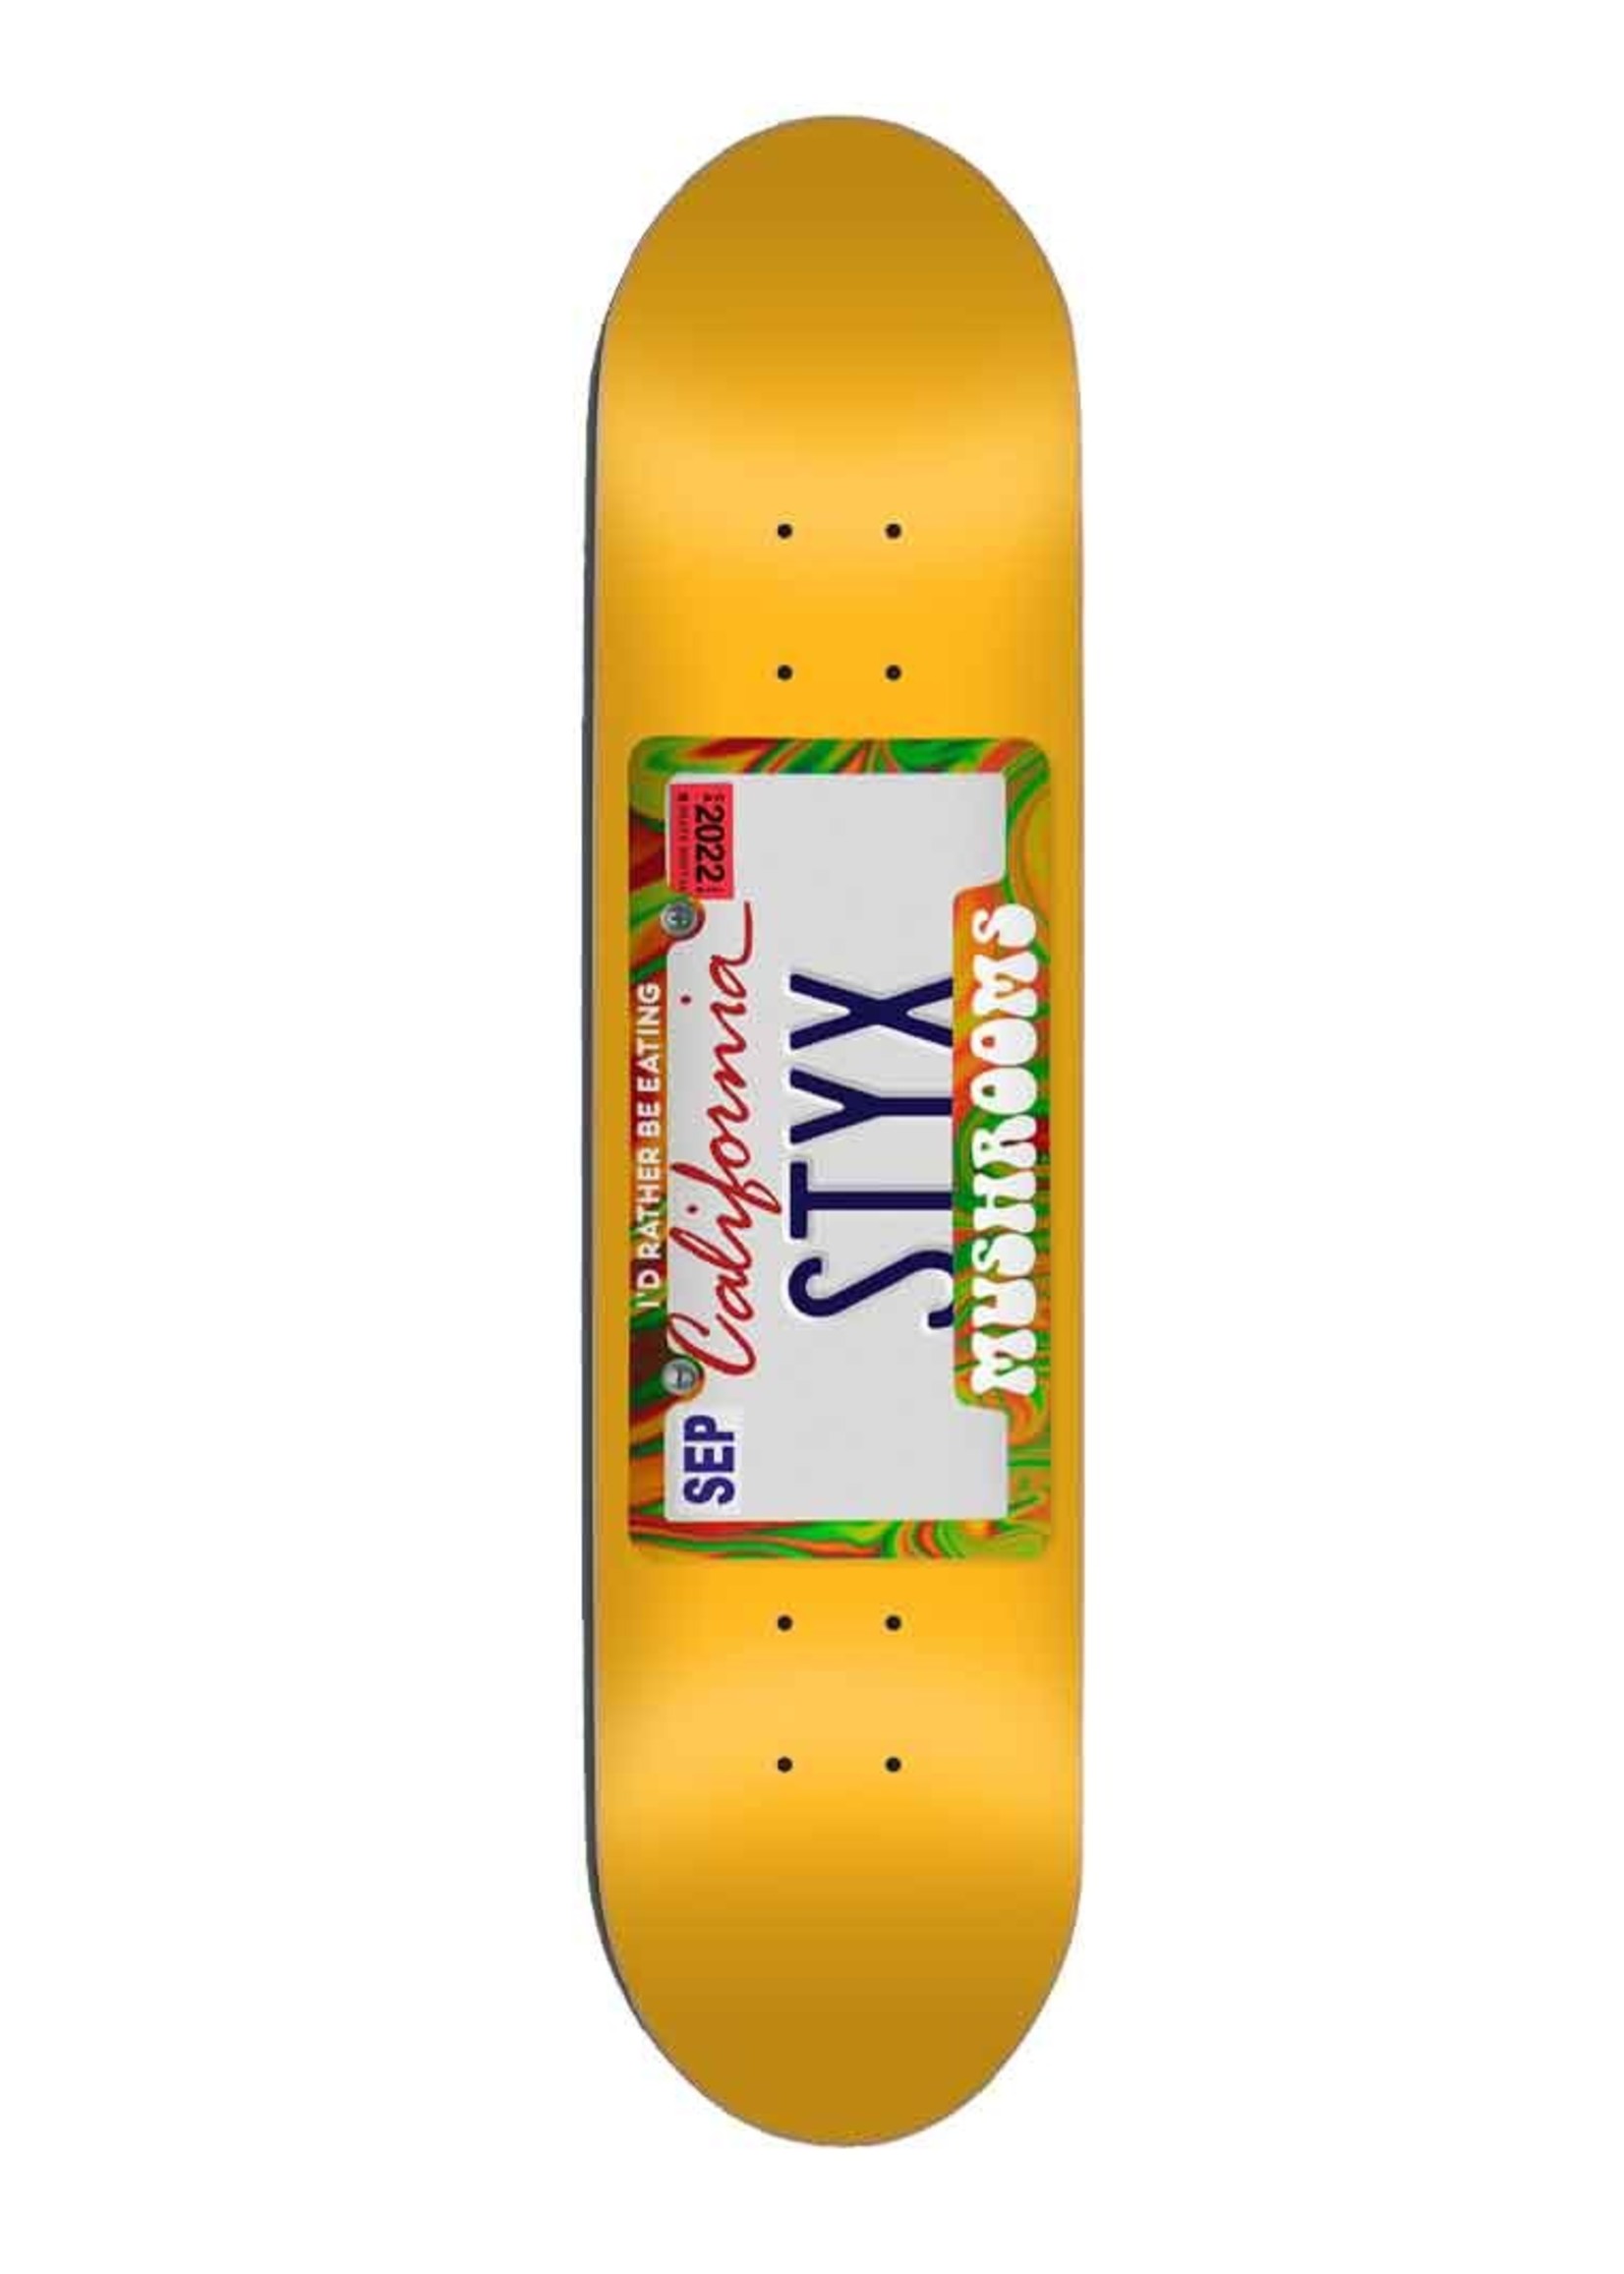 SKATE MENTAL STABA ID RATHER BE 8.5" DECK